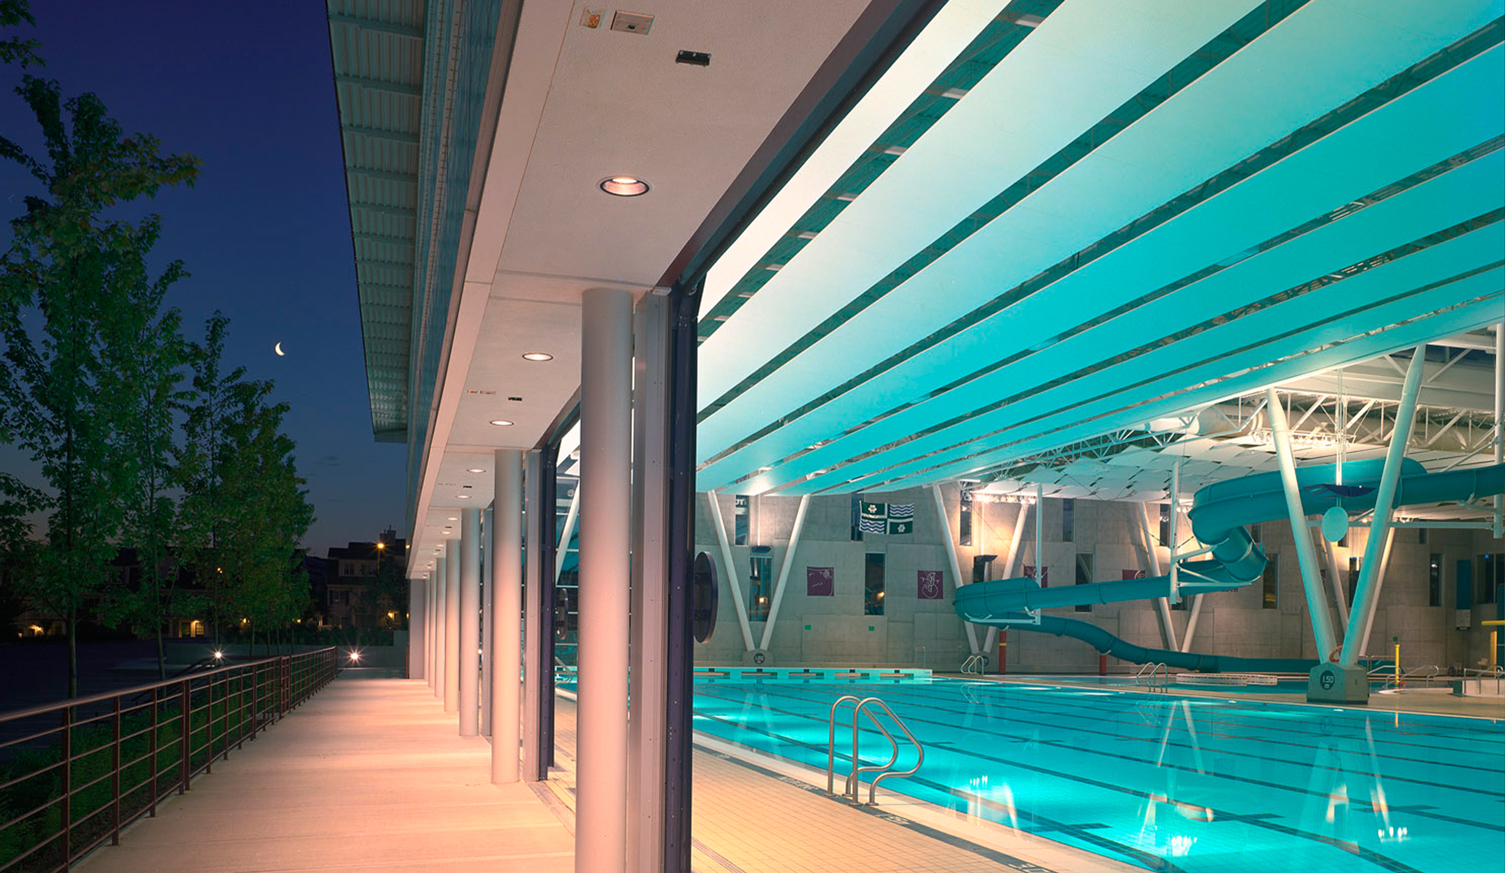 A nighttime view through the open retractable doors into the lap pool at Walnut Grove Community Centre.